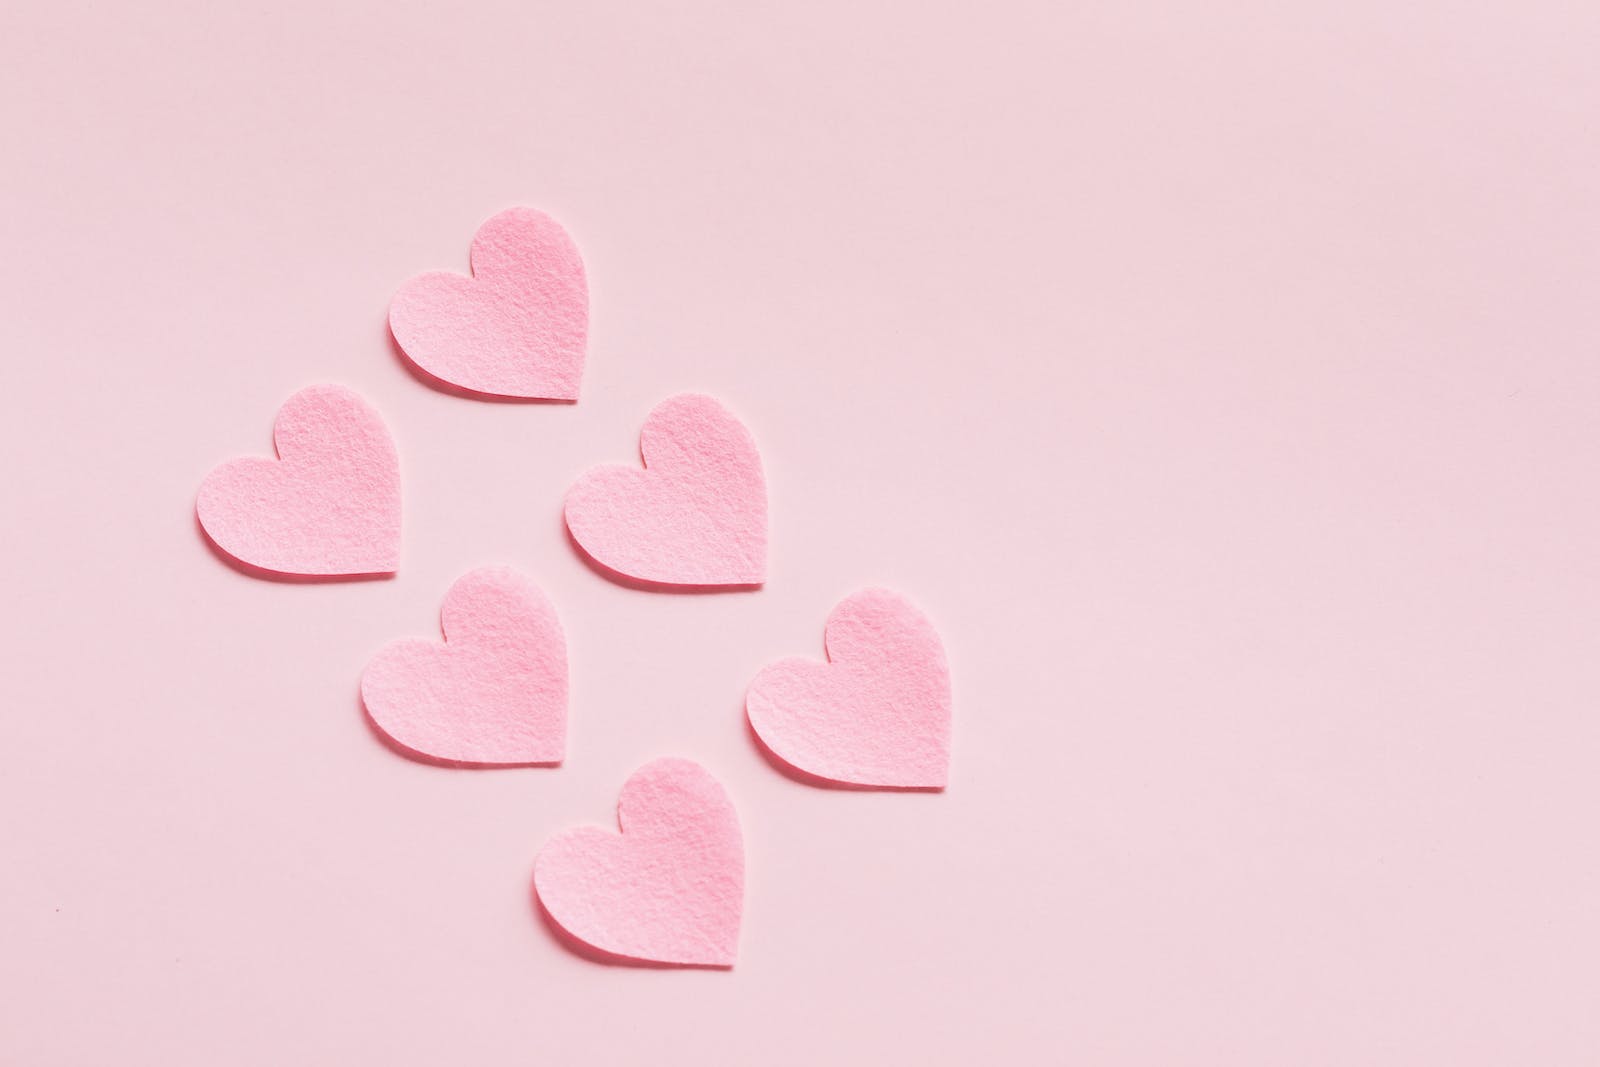 From above of composition made with heart shaped papers cutout of rough uneven pink cardboard placed diagonally on light pink background